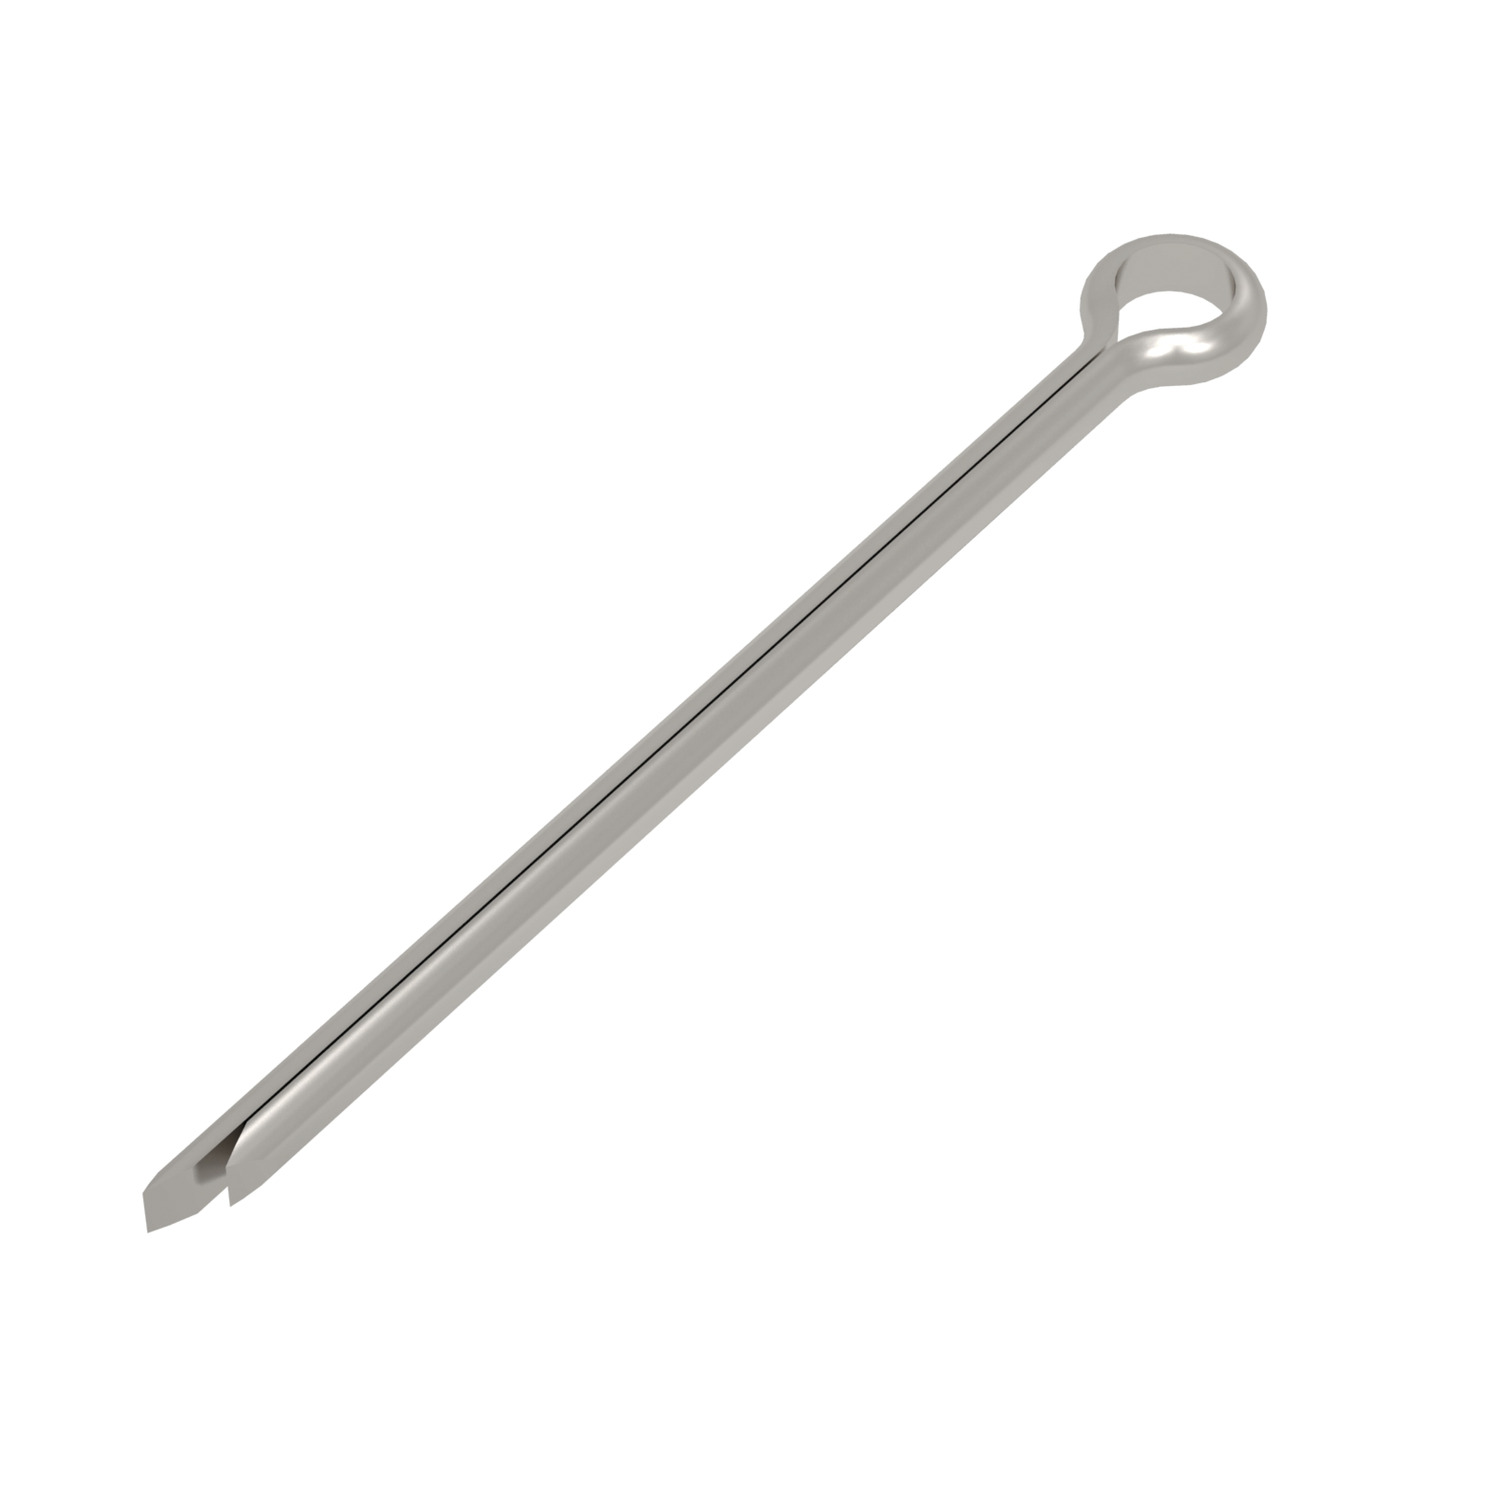 P1241.016-036 Stainless Cotter Pins Ø1.6x36 A2 s/s 